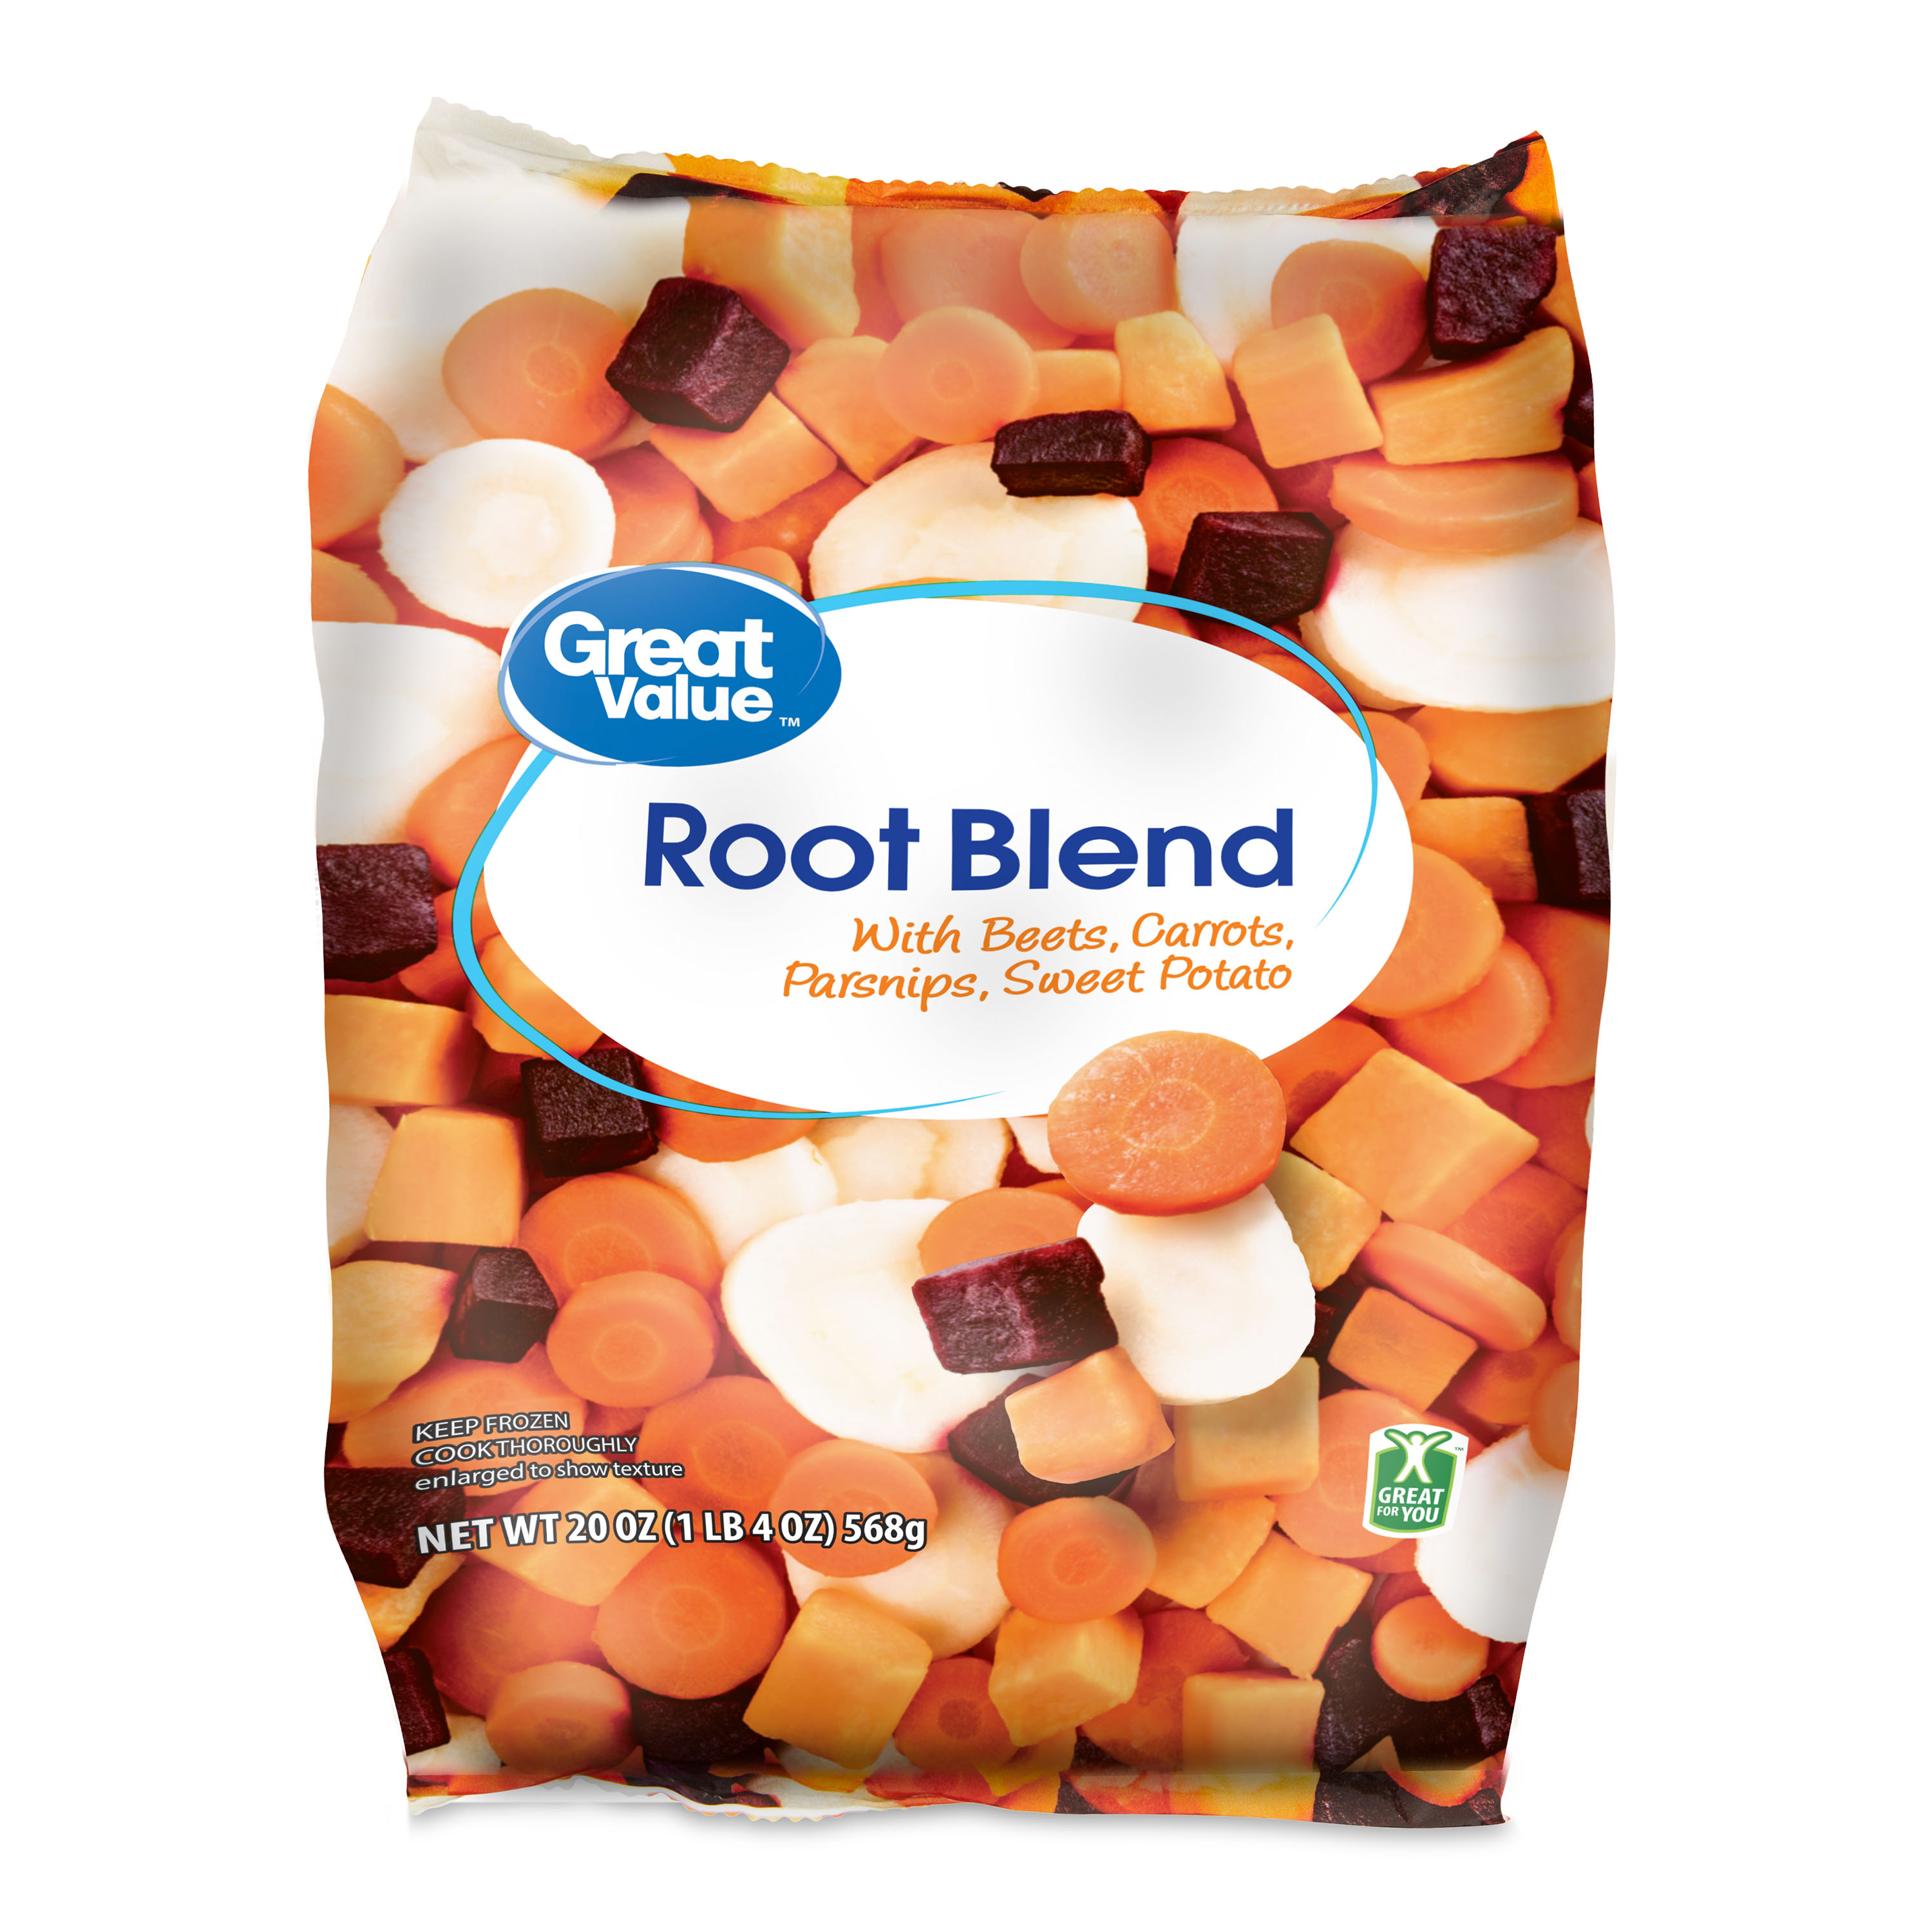 Great Value Root Blend, Beets, Carrots, Parsnips and Sweet Potatoes, 20 oz (Frozen) - image 1 of 8